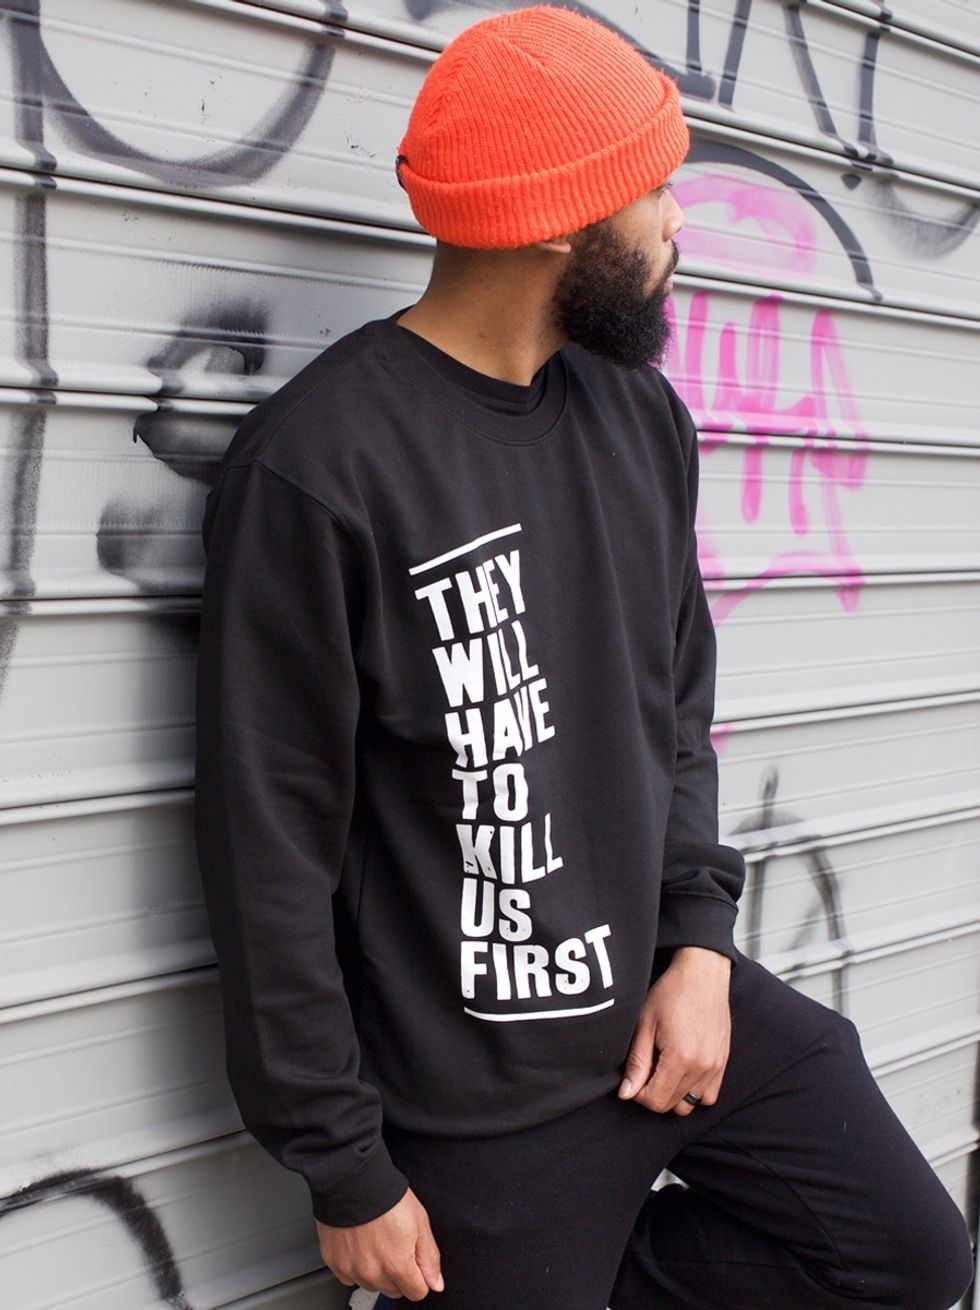 'They Will Have To Kill Us First' Tees & Sweatshirts Now Available In The Okayafrica Shop